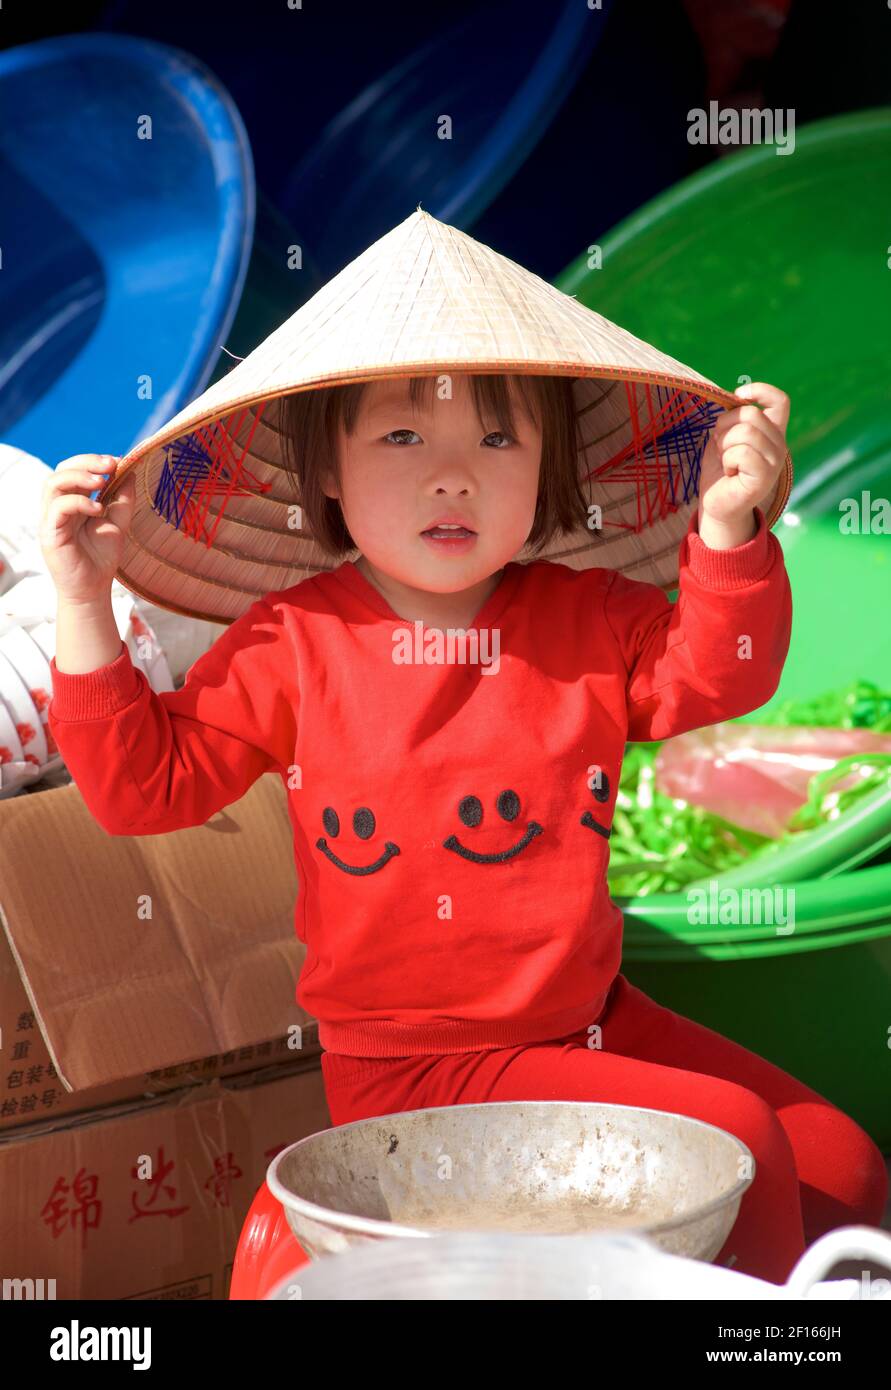 Young Vietnamese child at a market stall wearing red clothing and a distinctive Vietnamese style conical hat. Bac Ha, Lao Cai province, Vietnam Stock Photo